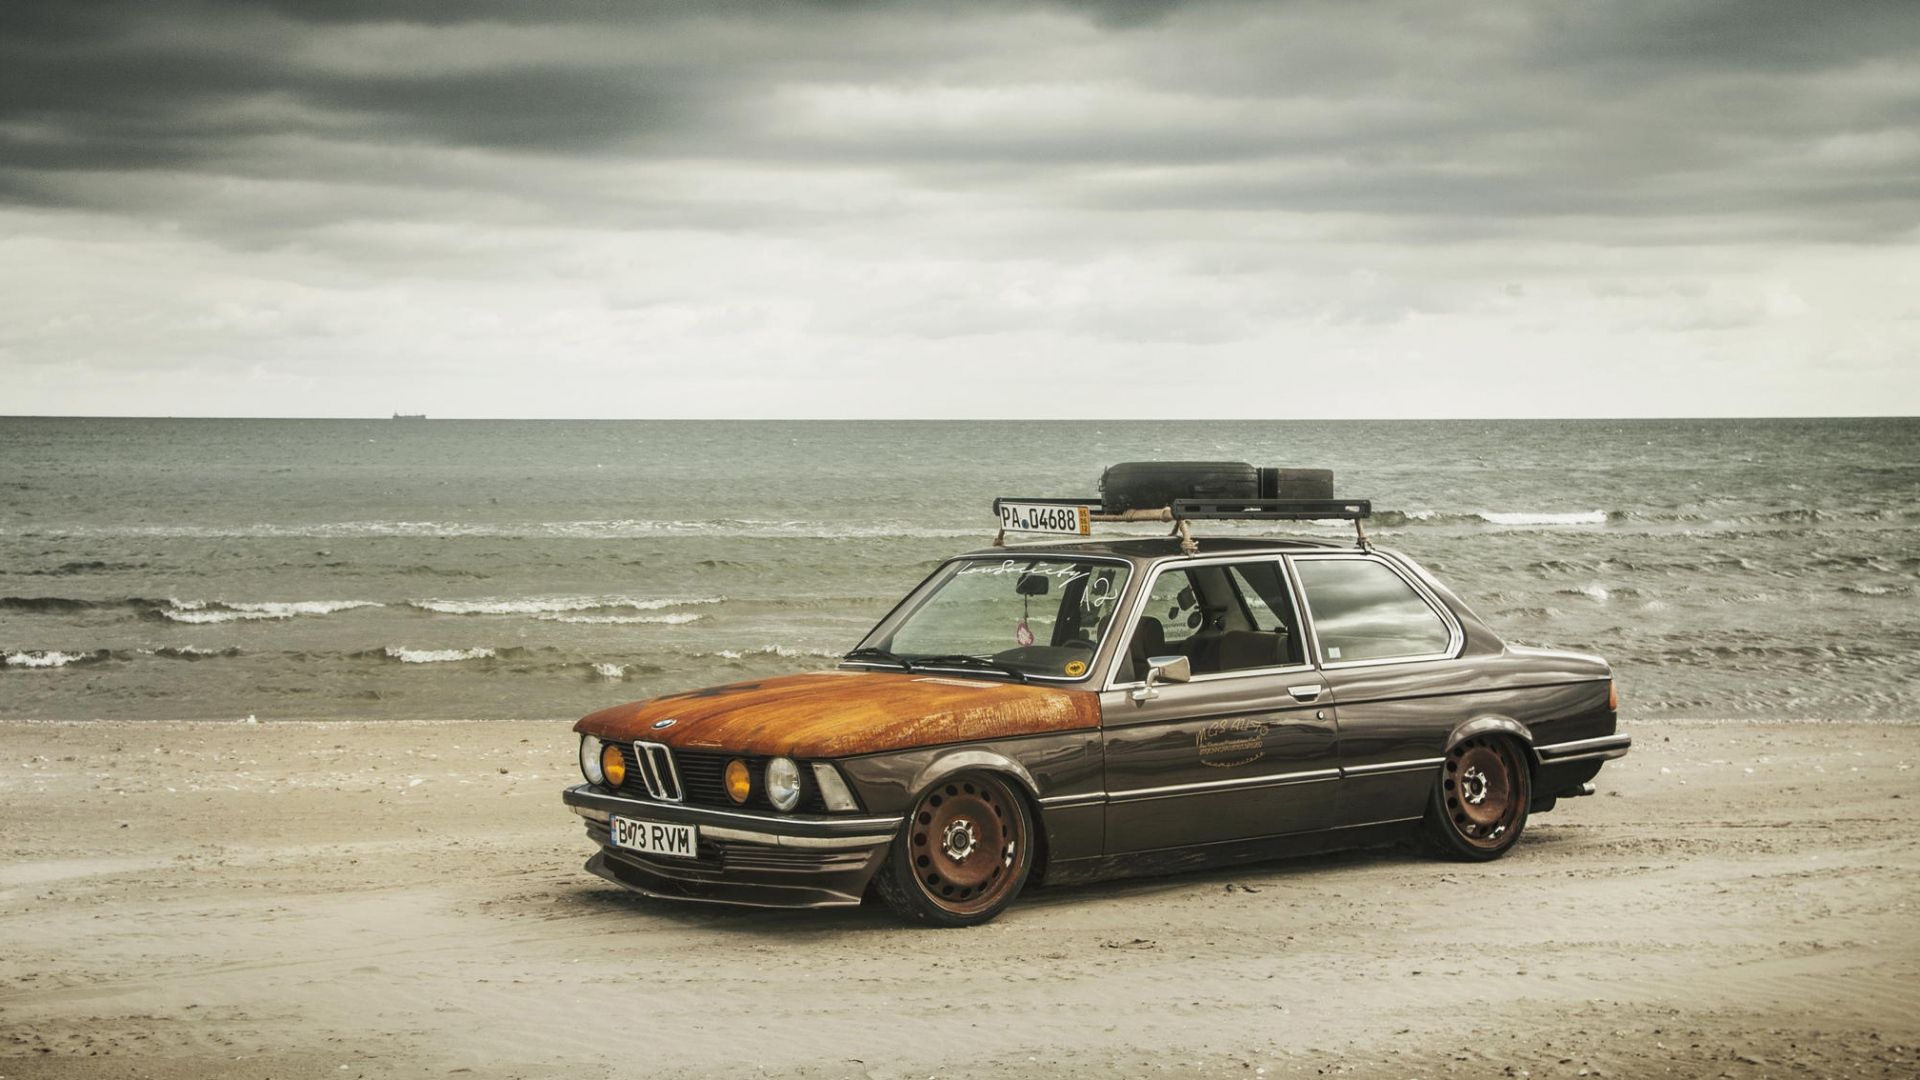 Free download Full HD Wallpaper bmw vintage beach ancient overcast